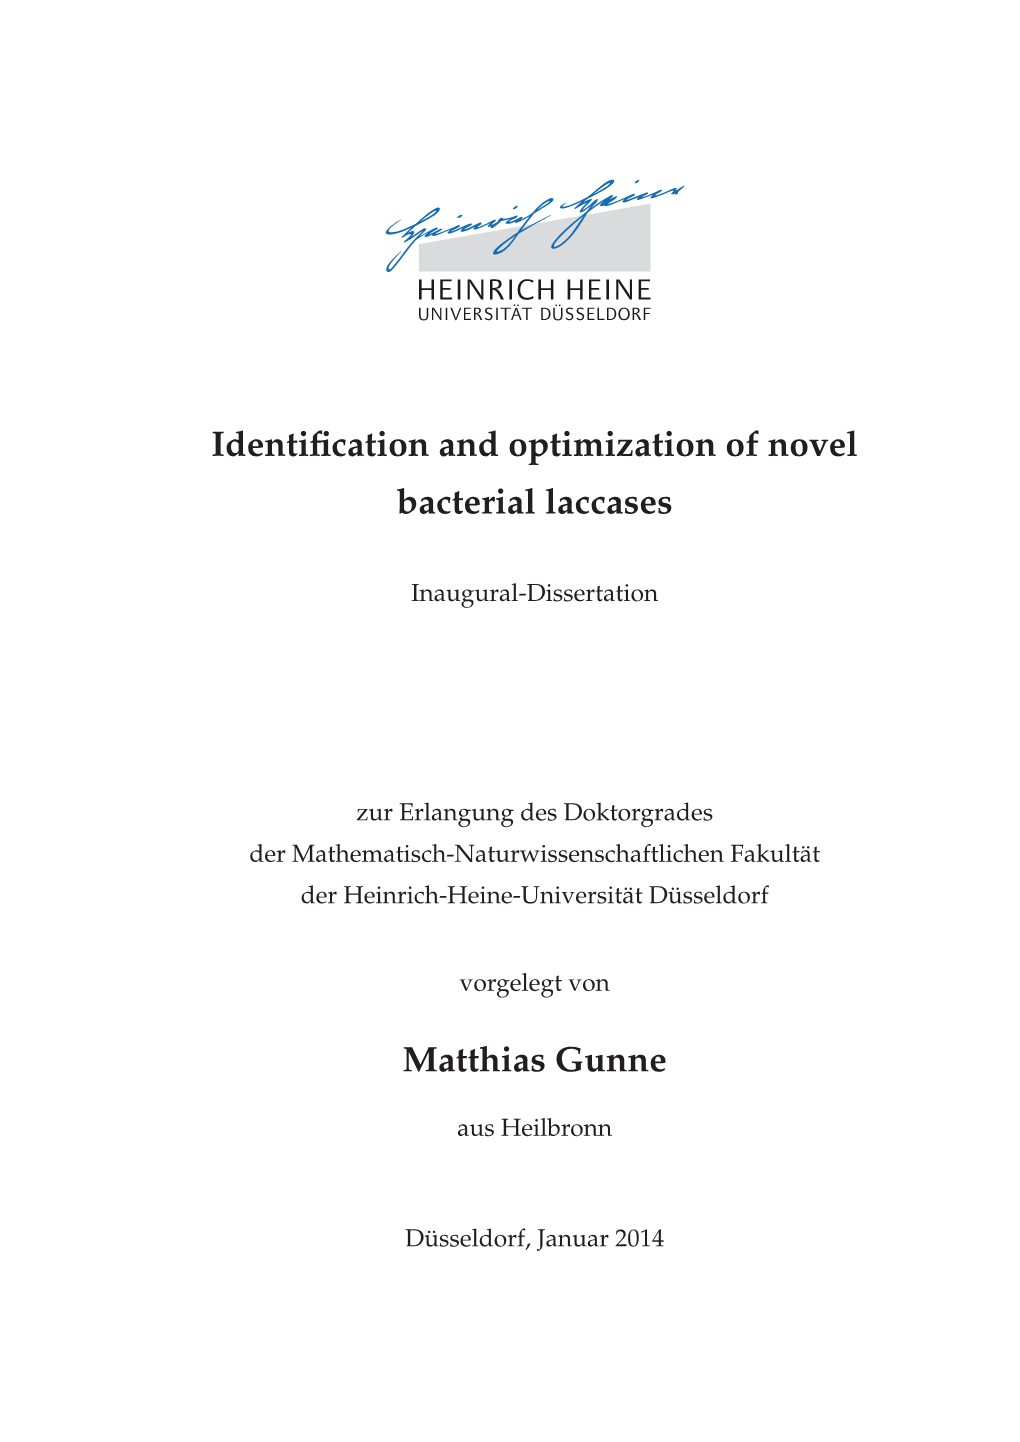 Identification and Optimization of Novel Bacterial Laccases Matthias Gunne